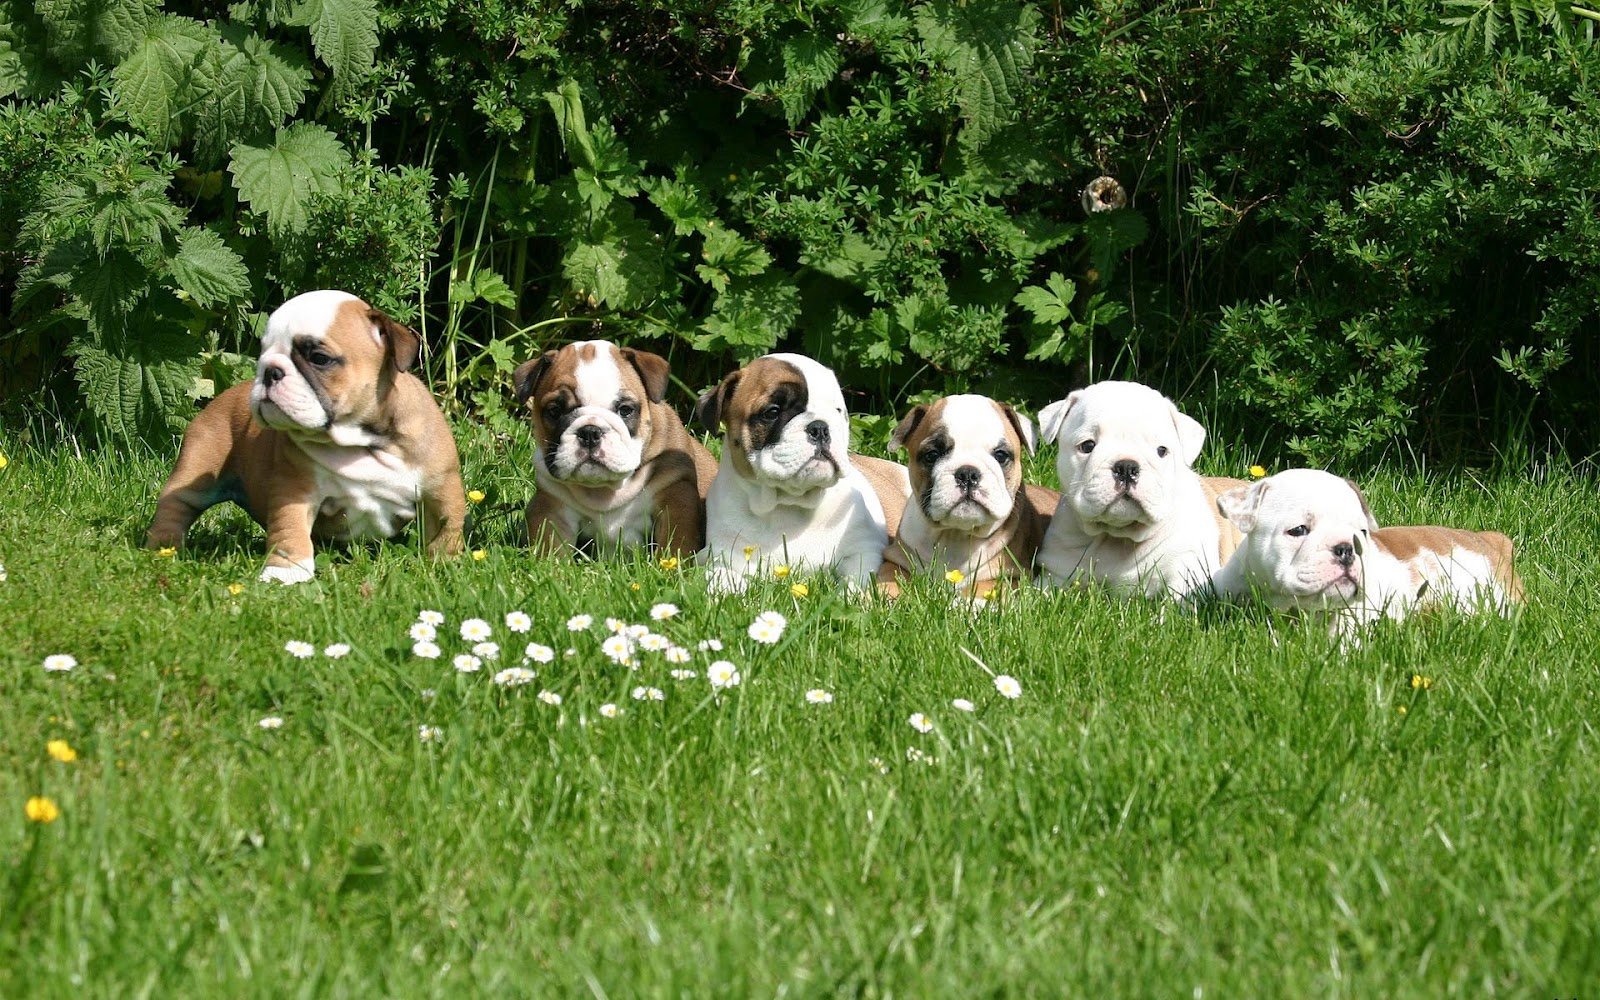  english bulldog puppies hd dogs wallpapers backgrounds pictures photos